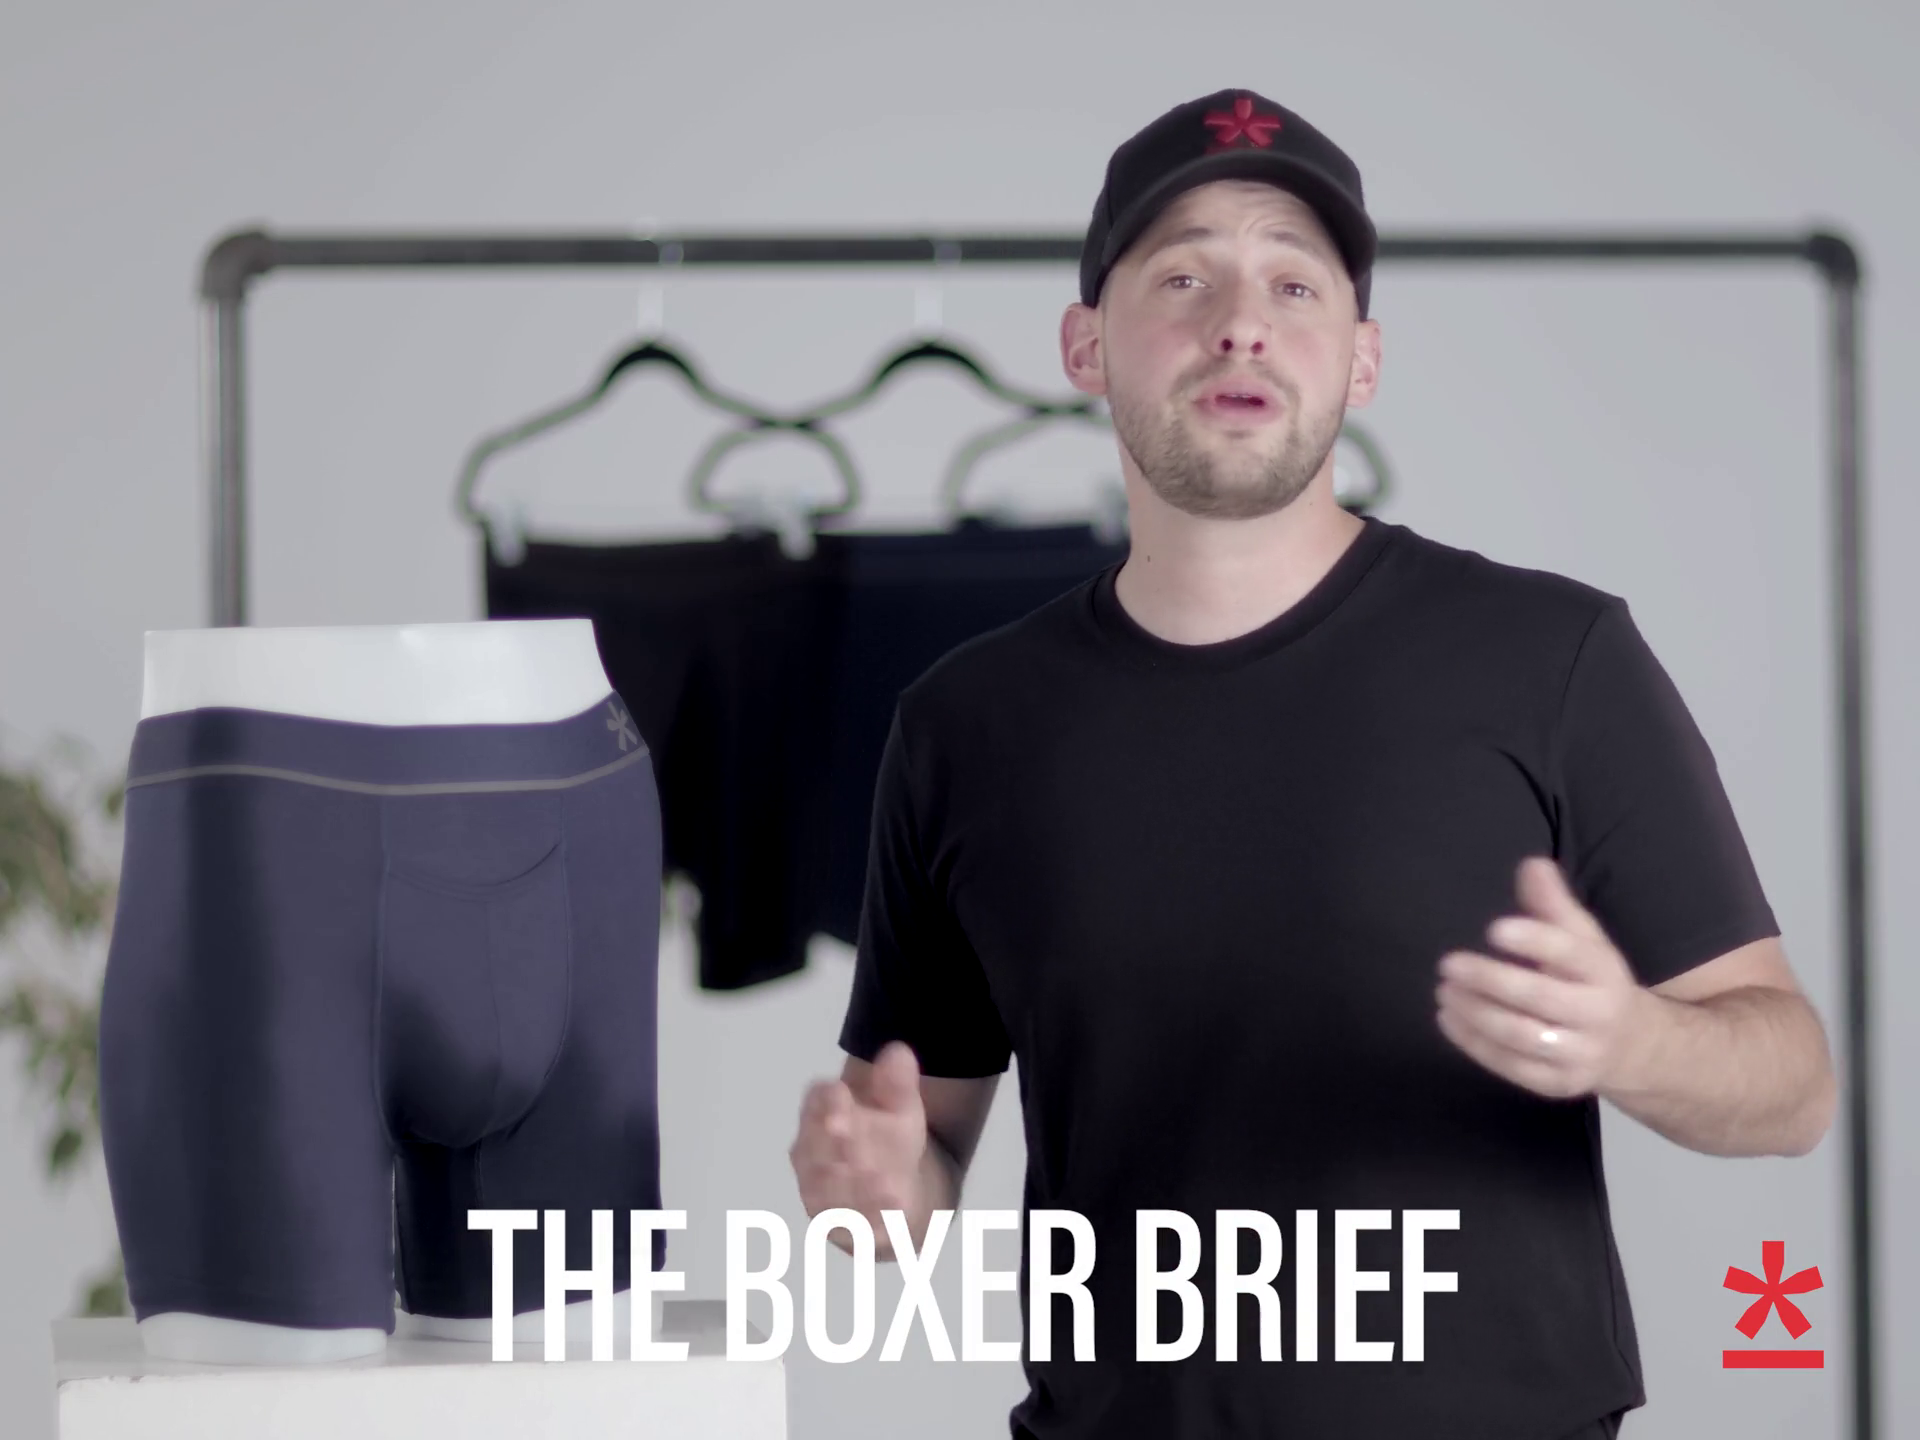 Load video: What The Boxer Brief is made of?